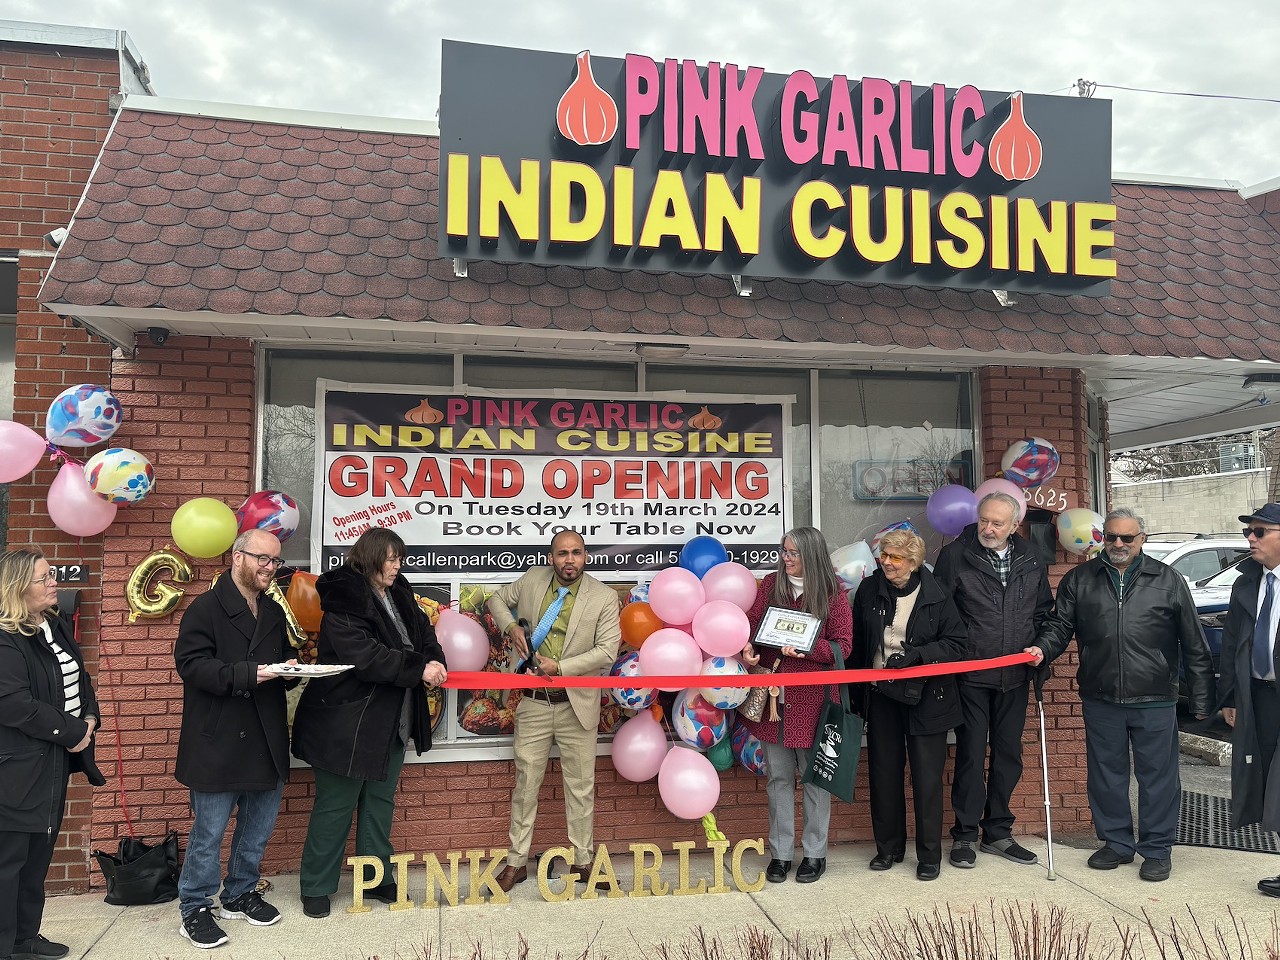 Pink Garlic Indian Cuisine 
18625 Ecorse Rd., Allen Park; 947-948-5680;  pink-garlic-indian-cuisine.square.site
Oak Park favorite Pink Garlic opened a second location in Allen Park in March, offering both dine-in and carryout. Like the original spot, the new Pink Garlic’s menu features an extensive lineup of Indian and Indo-Chinese staples like chicken biryani, orange chicken, momos, and tandoori chicken. 
Read more here.